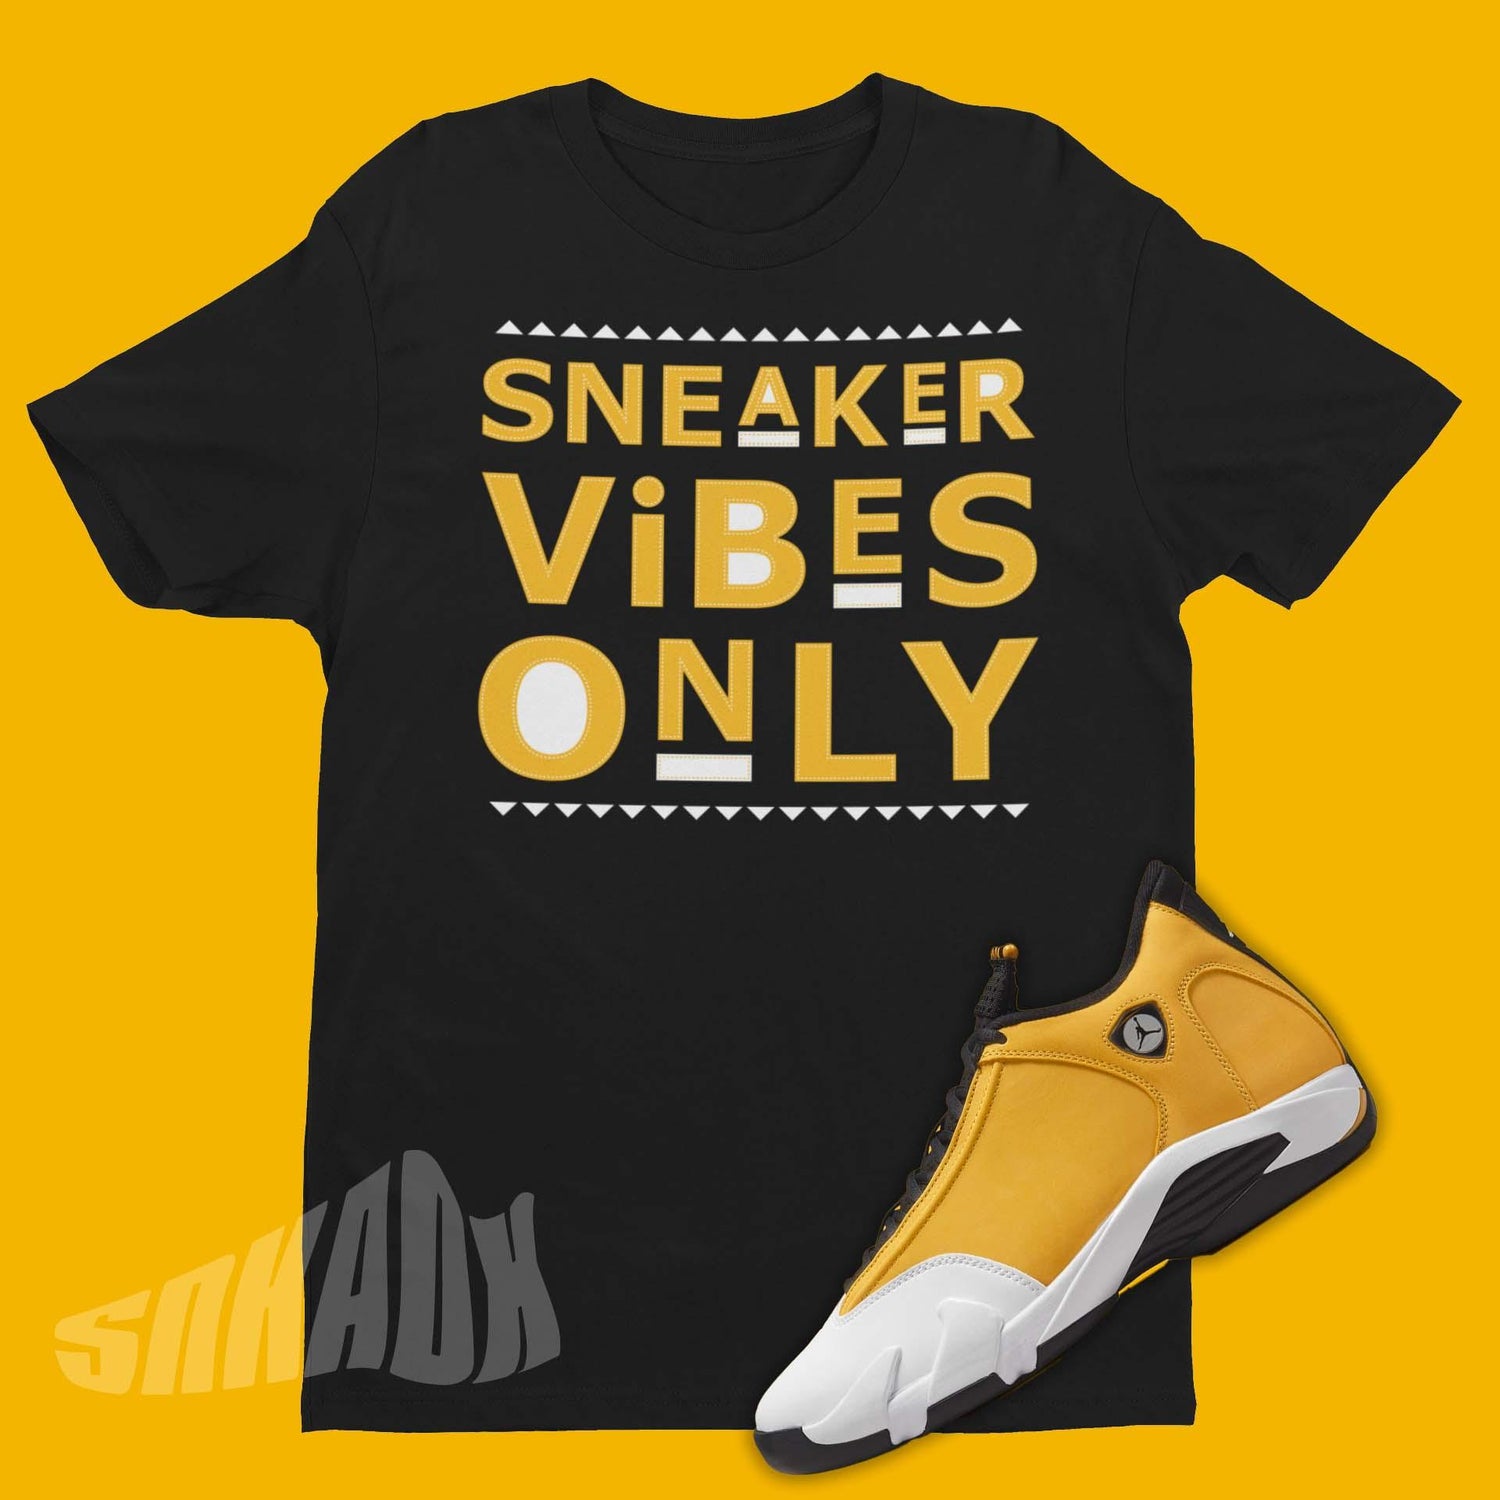 Sneaker Vibes Only Shirt To Match Air Jordan 14 Ginger In Black